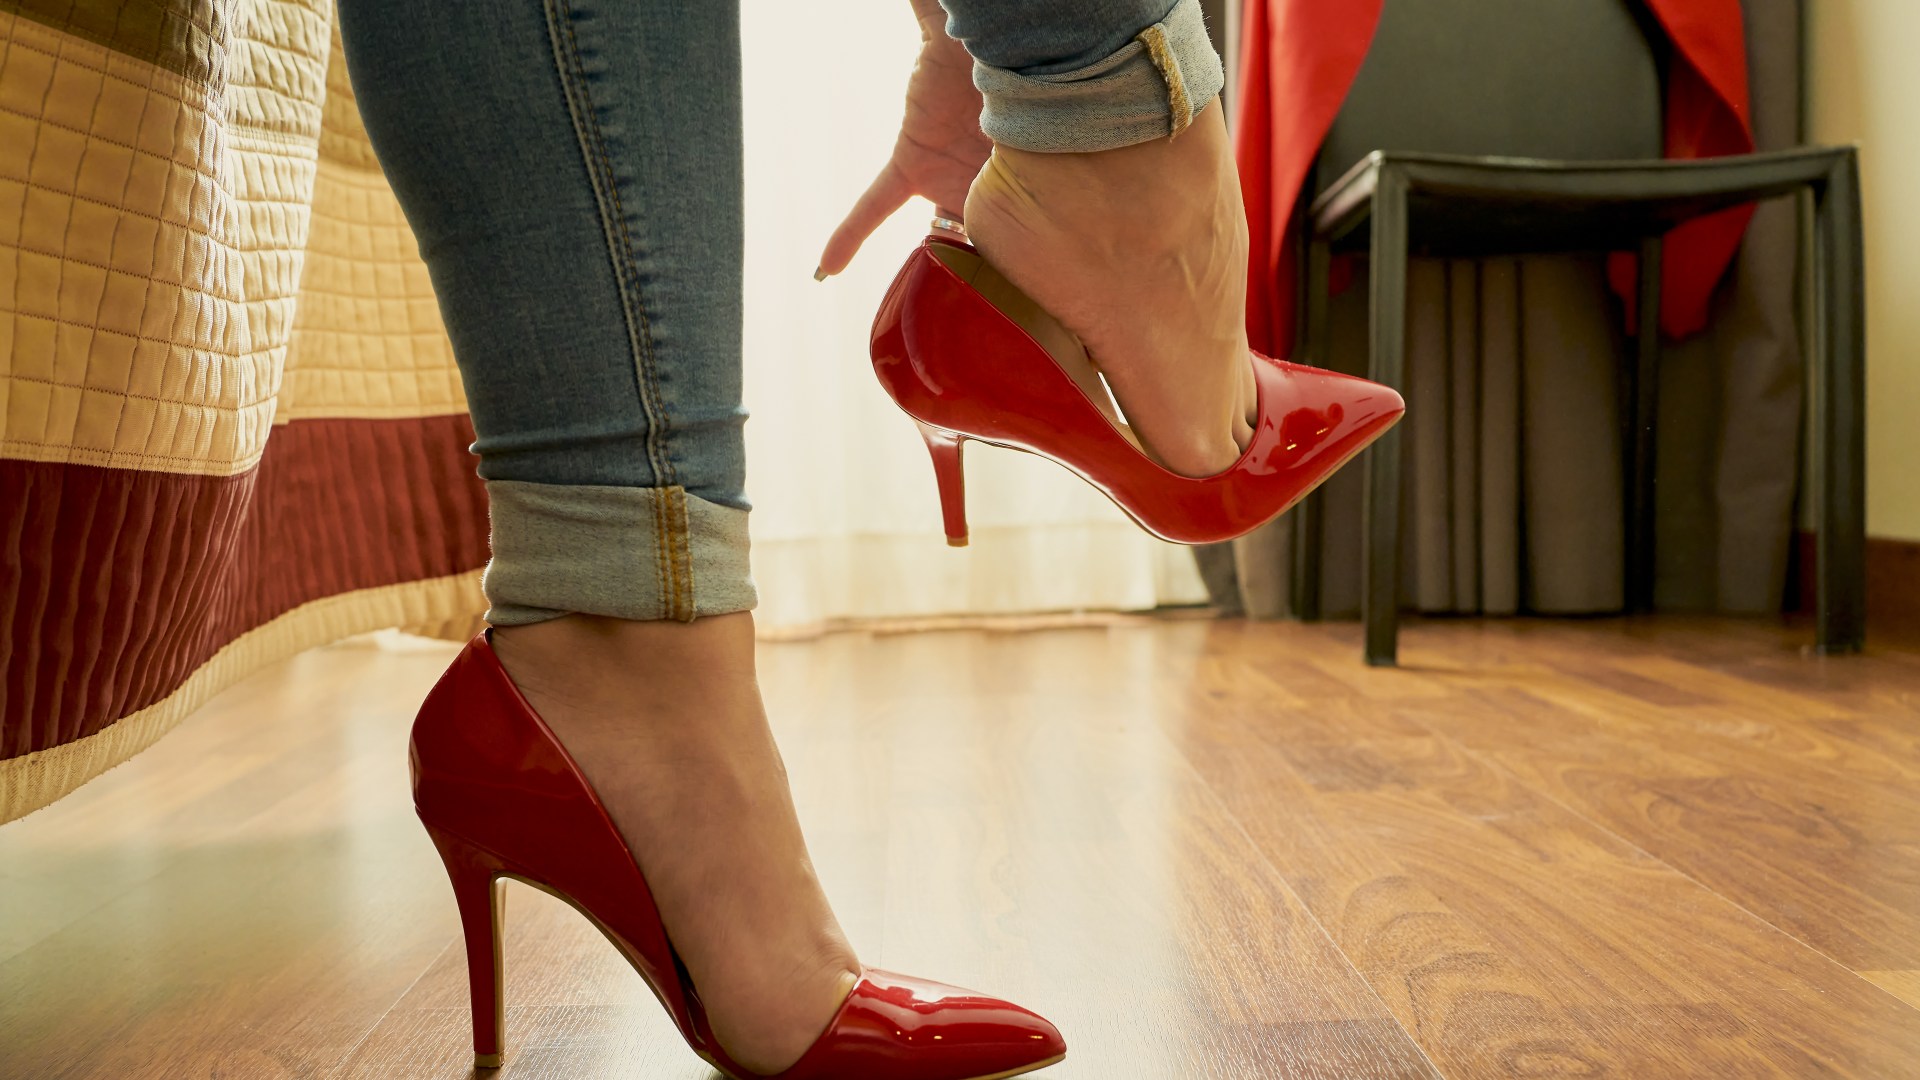 Why wearing stilettos could help you keep fit and also benefit blokes revealed by scientists [Video]